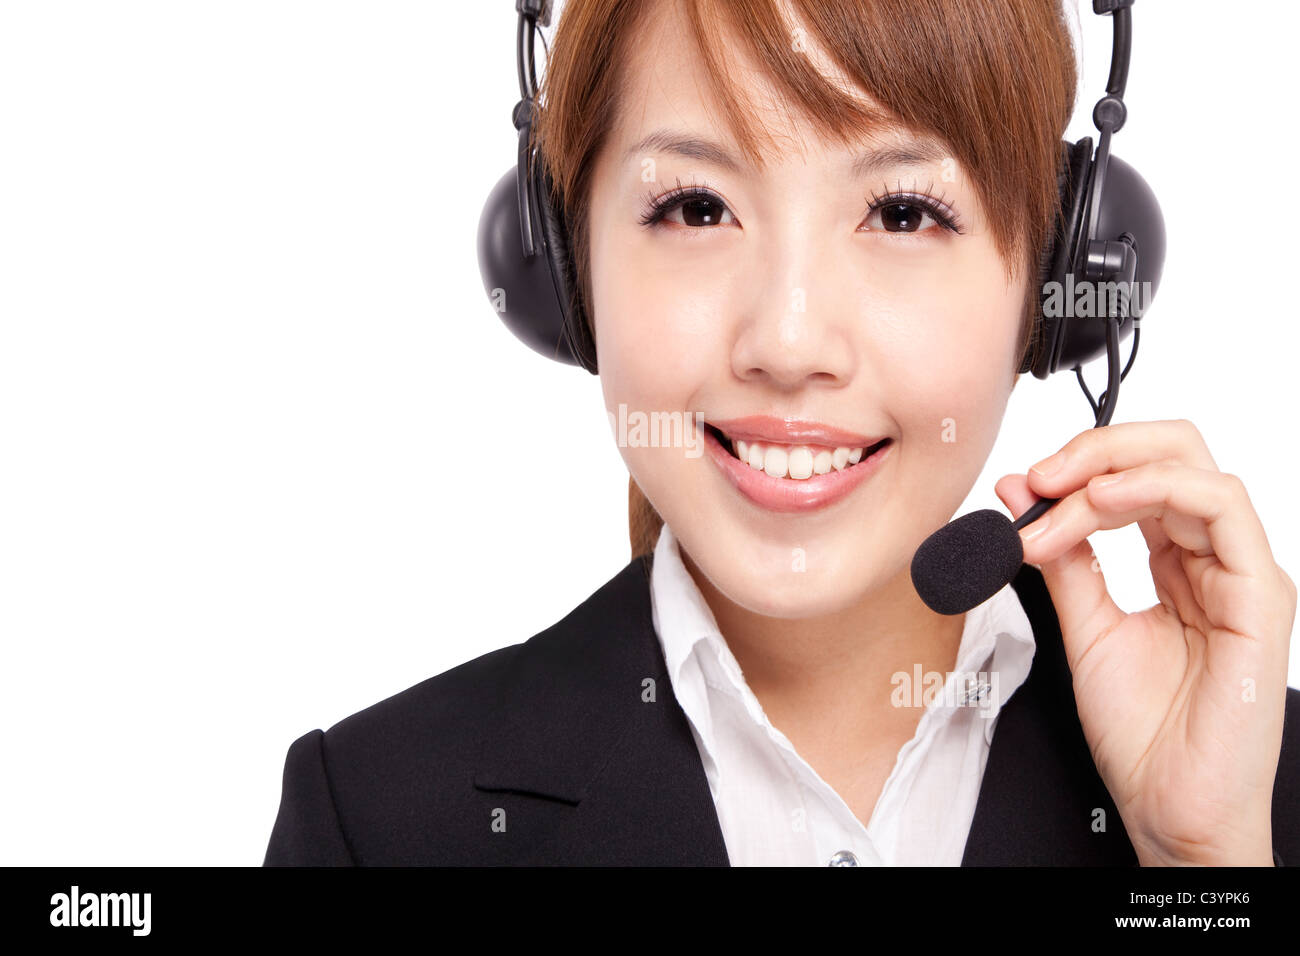 Smiling businesswoman and Customer Representative with headset Stock Photo